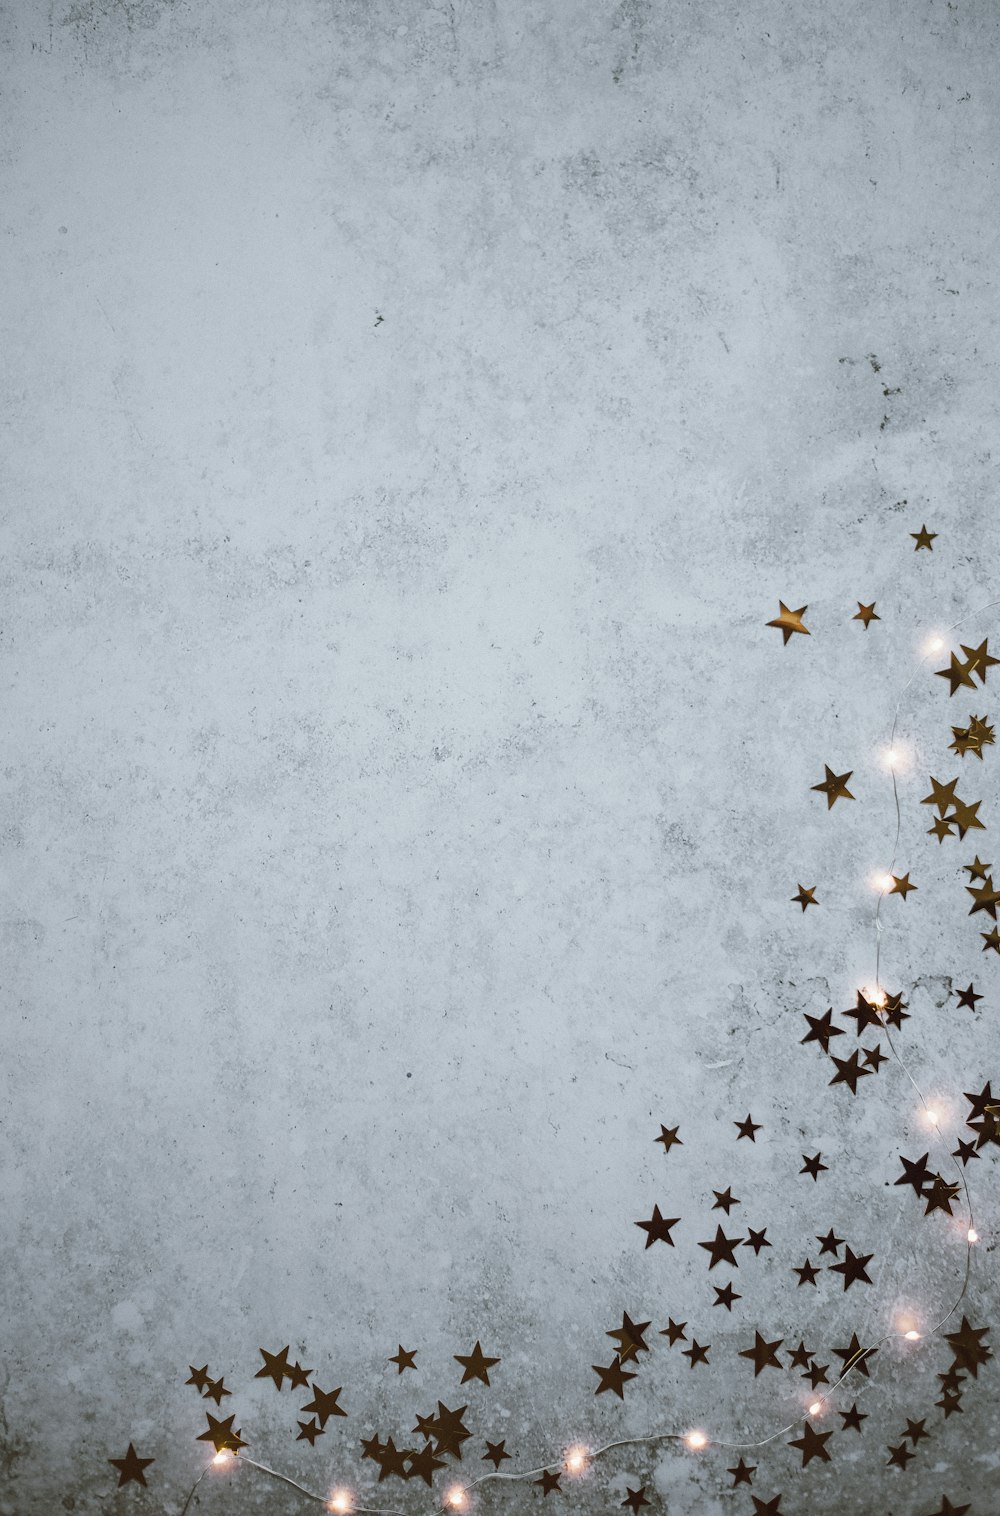 New Year Background Pictures | Download Free Images on Unsplash